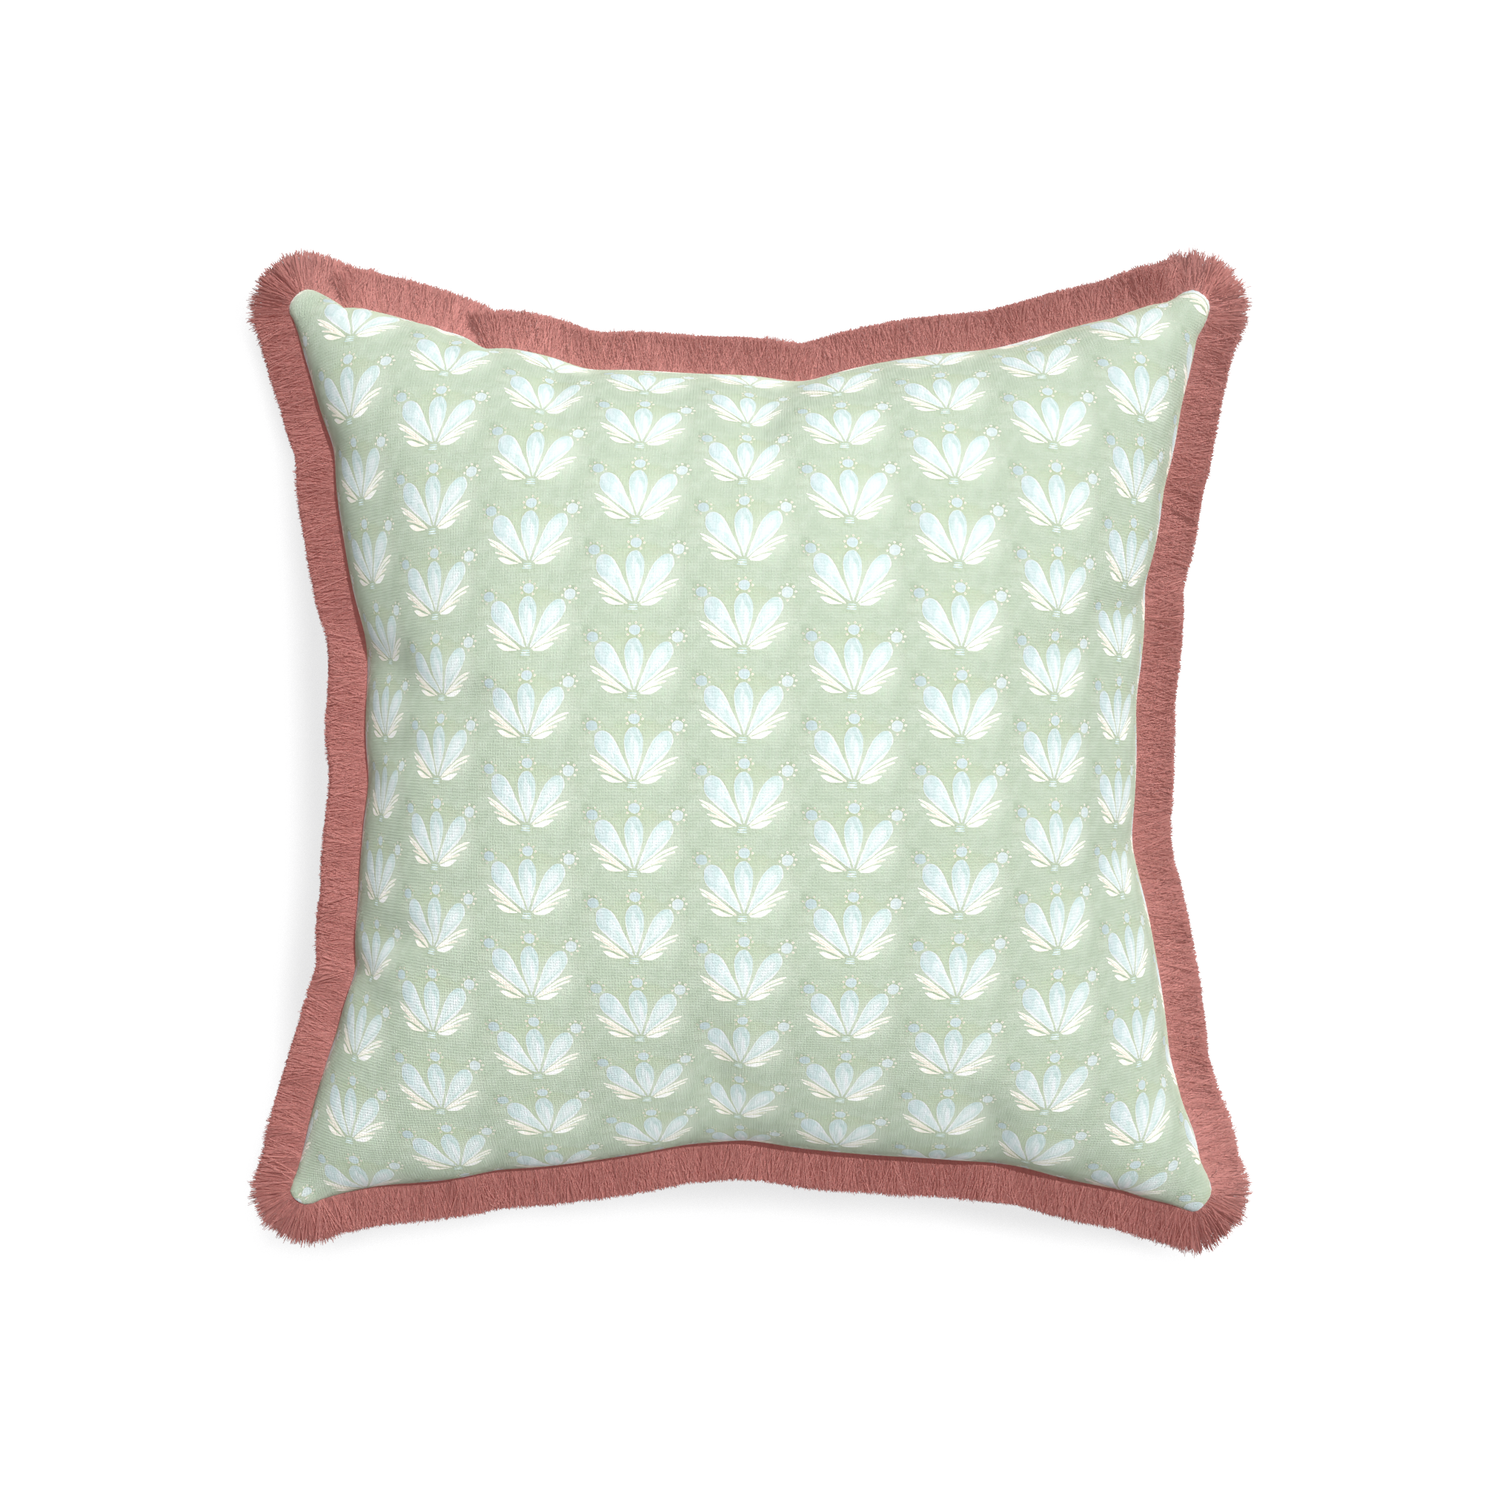 20-square serena sea salt custom blue & green floral drop repeatpillow with d fringe on white background